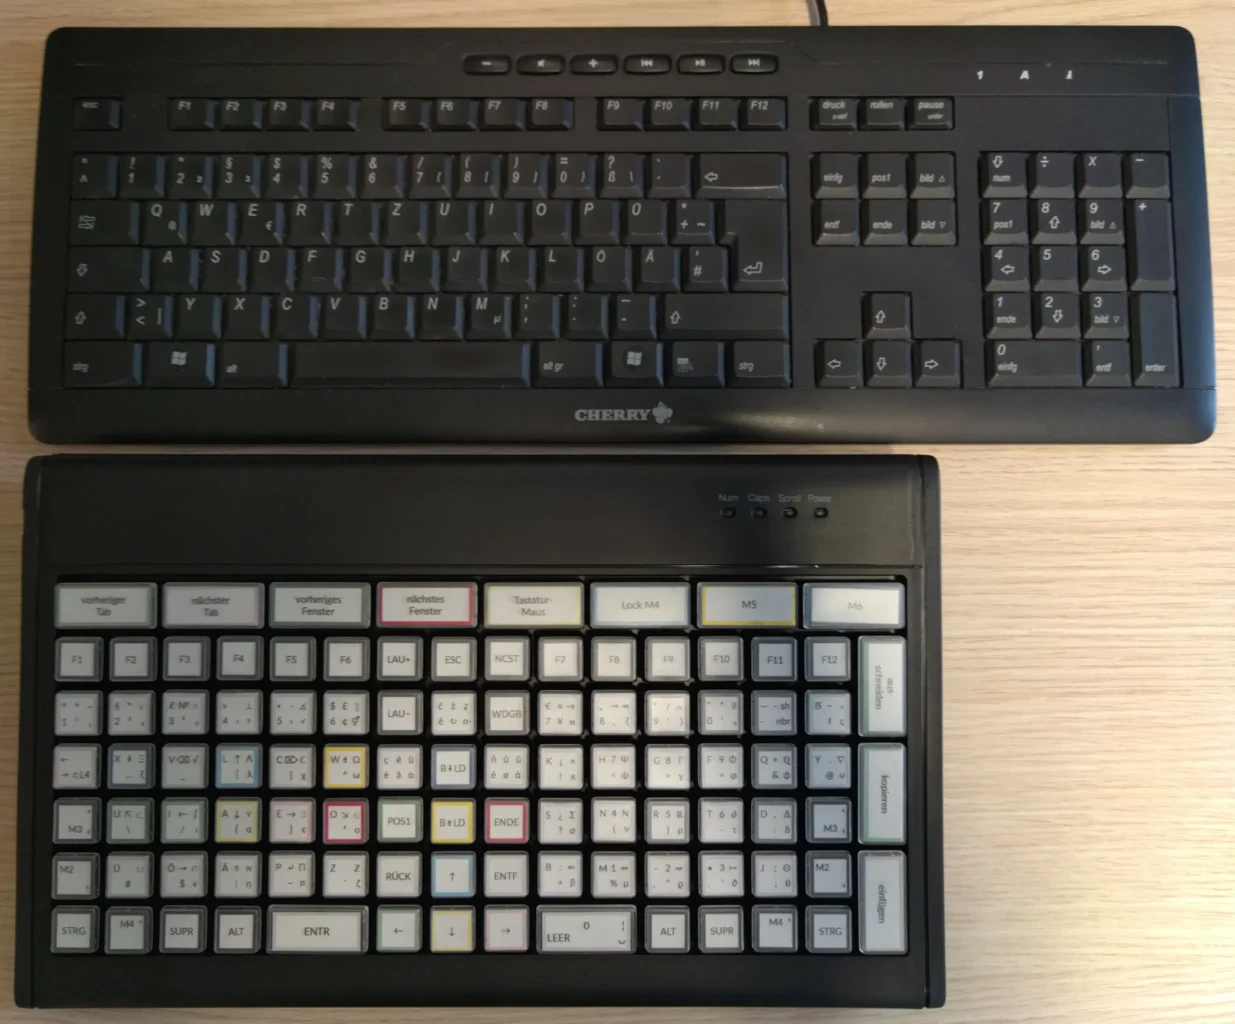 Columna hardware v1 comparison with a classical qwertz keyboard